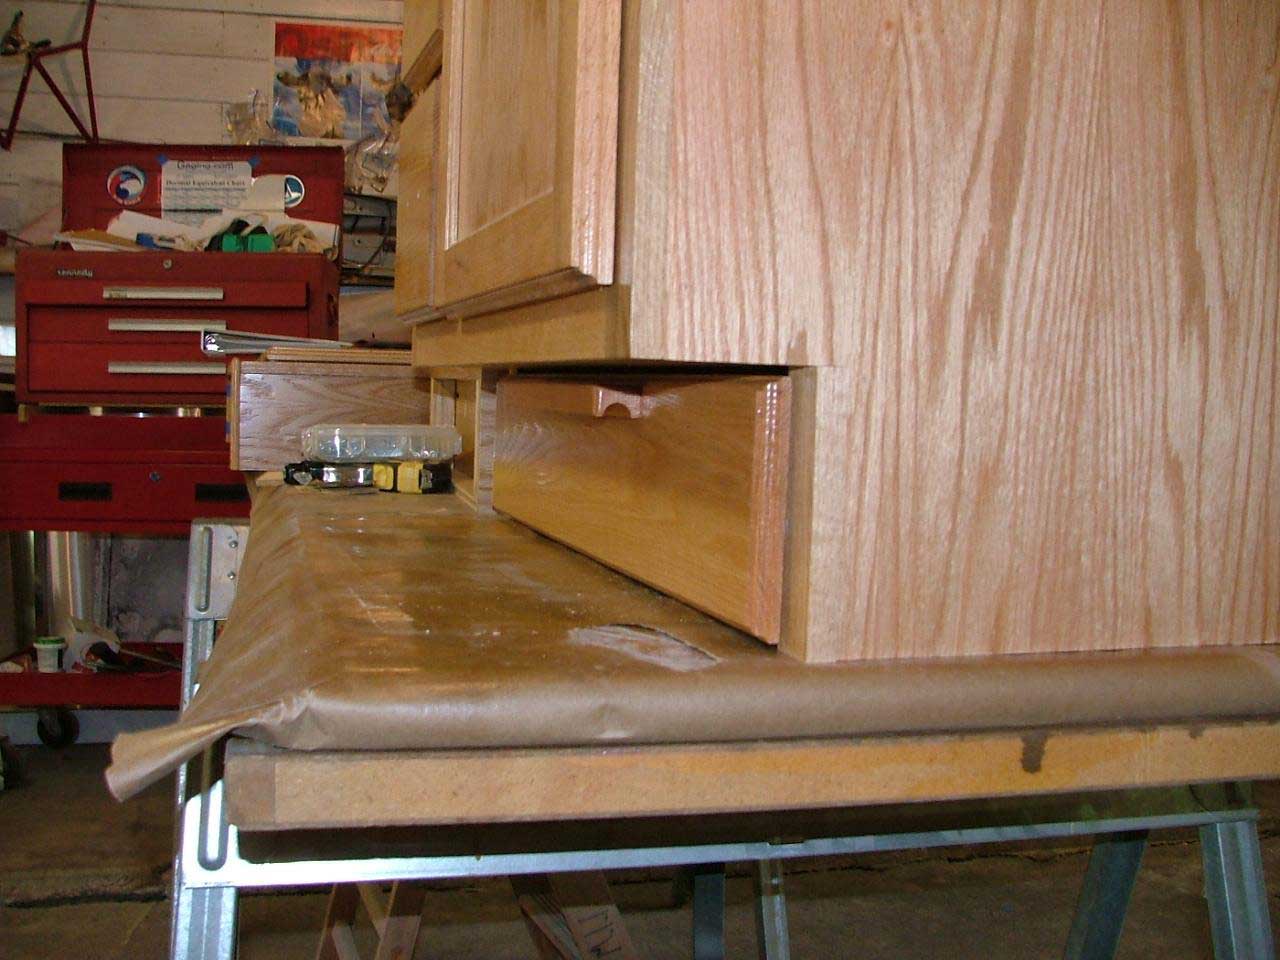 3 Reasons To Add a Toe-Kick Drawer To Your Home